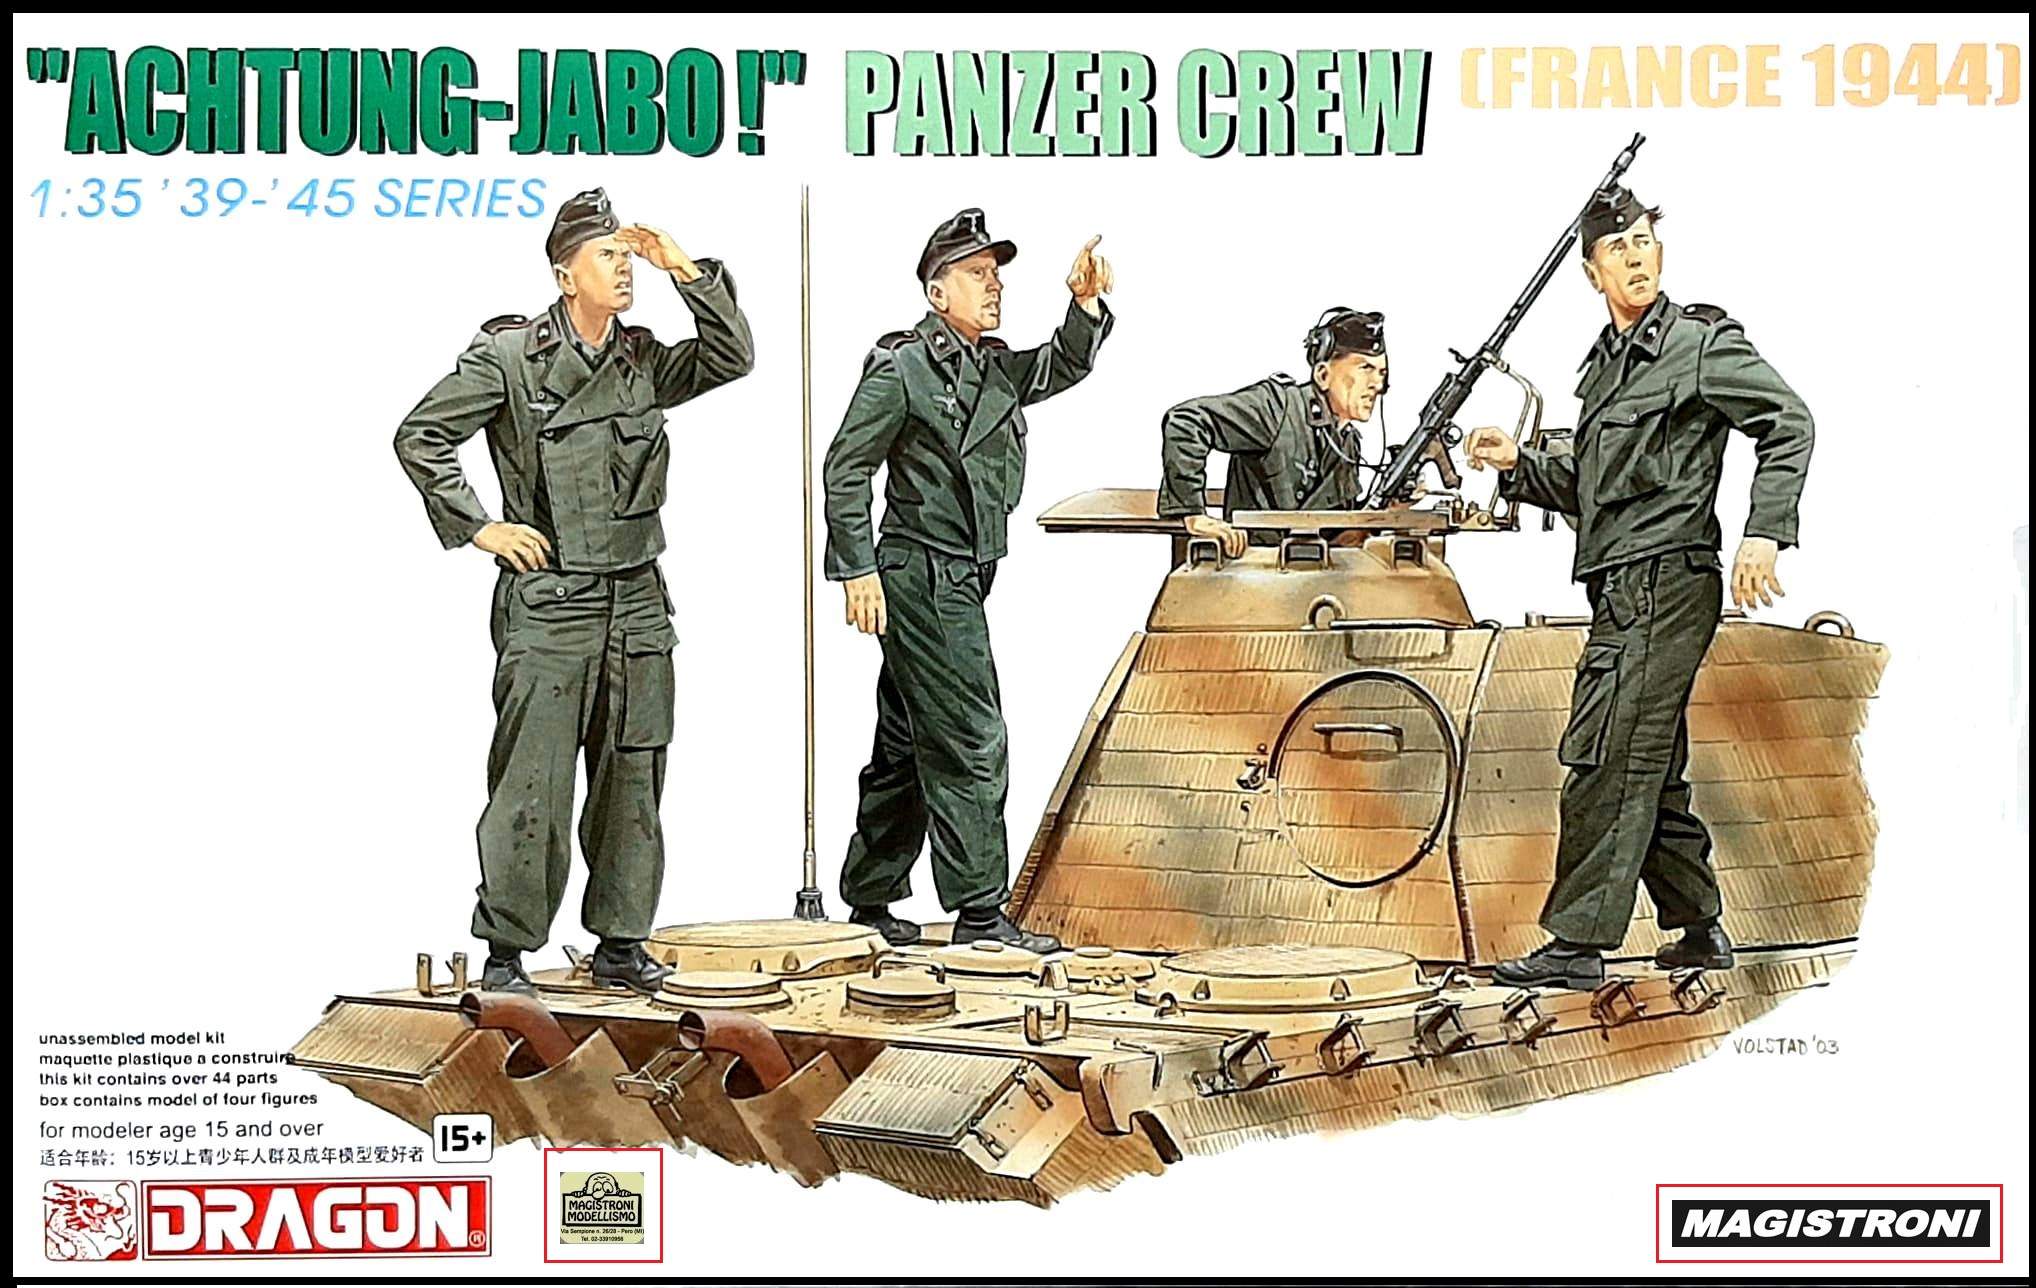 "ACHTUNG"-JABO!"PANZER CREW (France 1944)